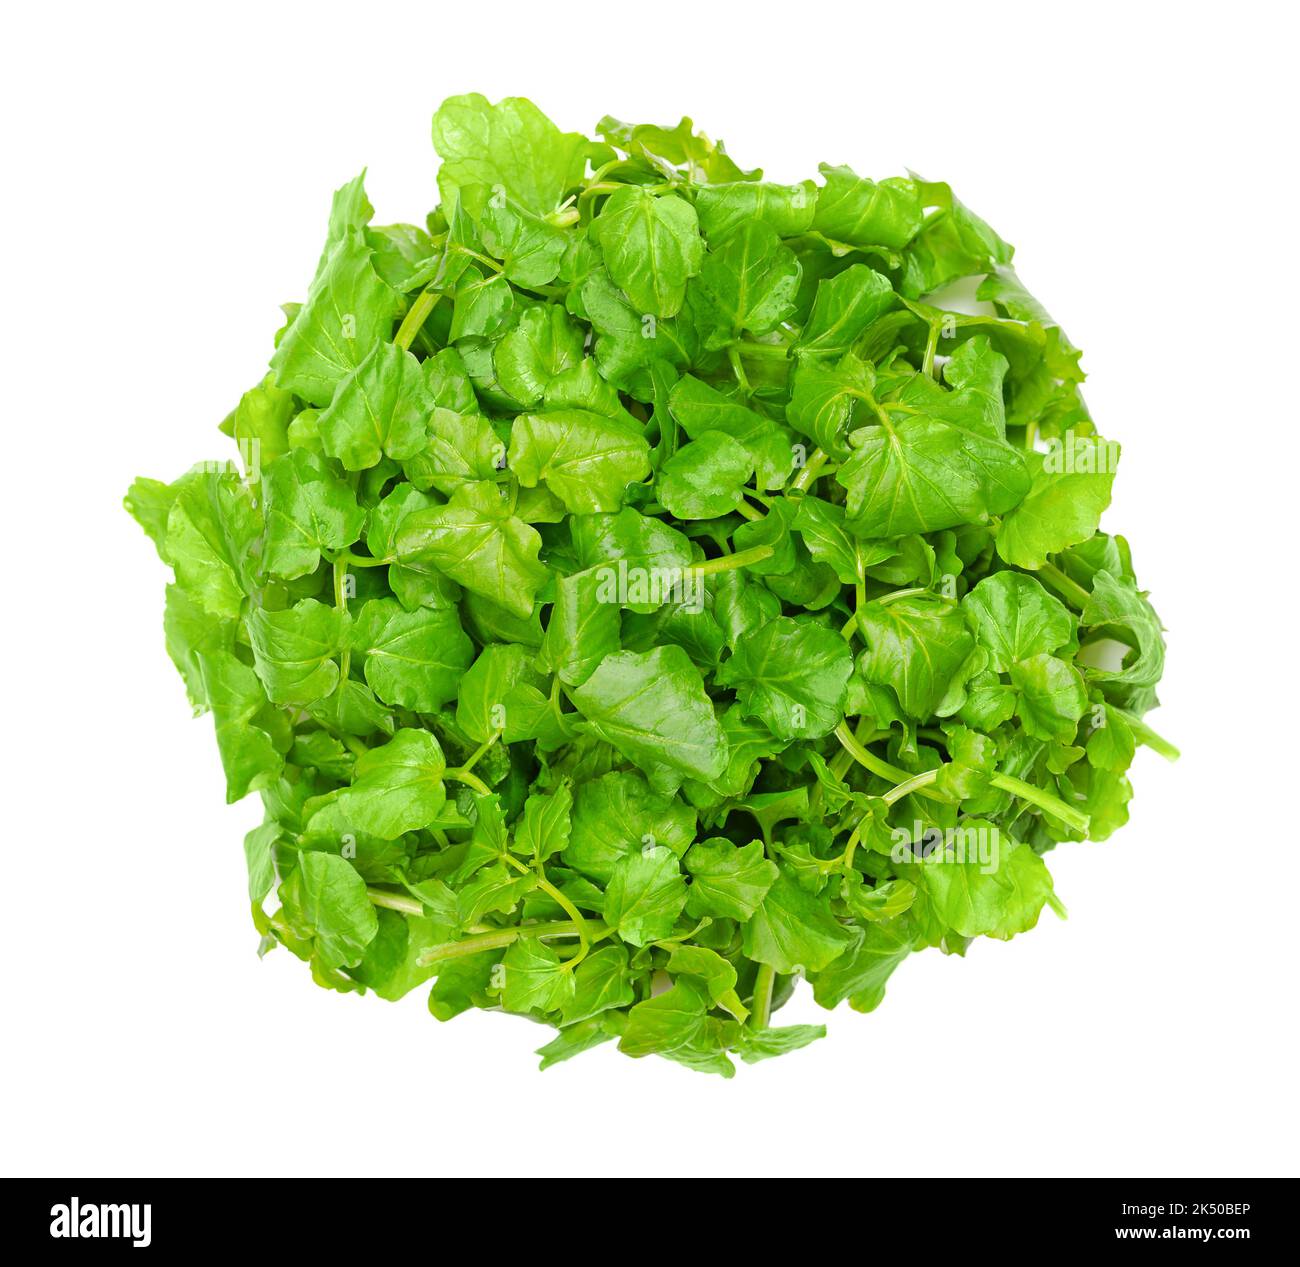 Watercress, yellowcress, from above. Fresh, raw and green leaves of Nasturtium officinale, an aquatic flowering plant with a piquant flavor. Stock Photo